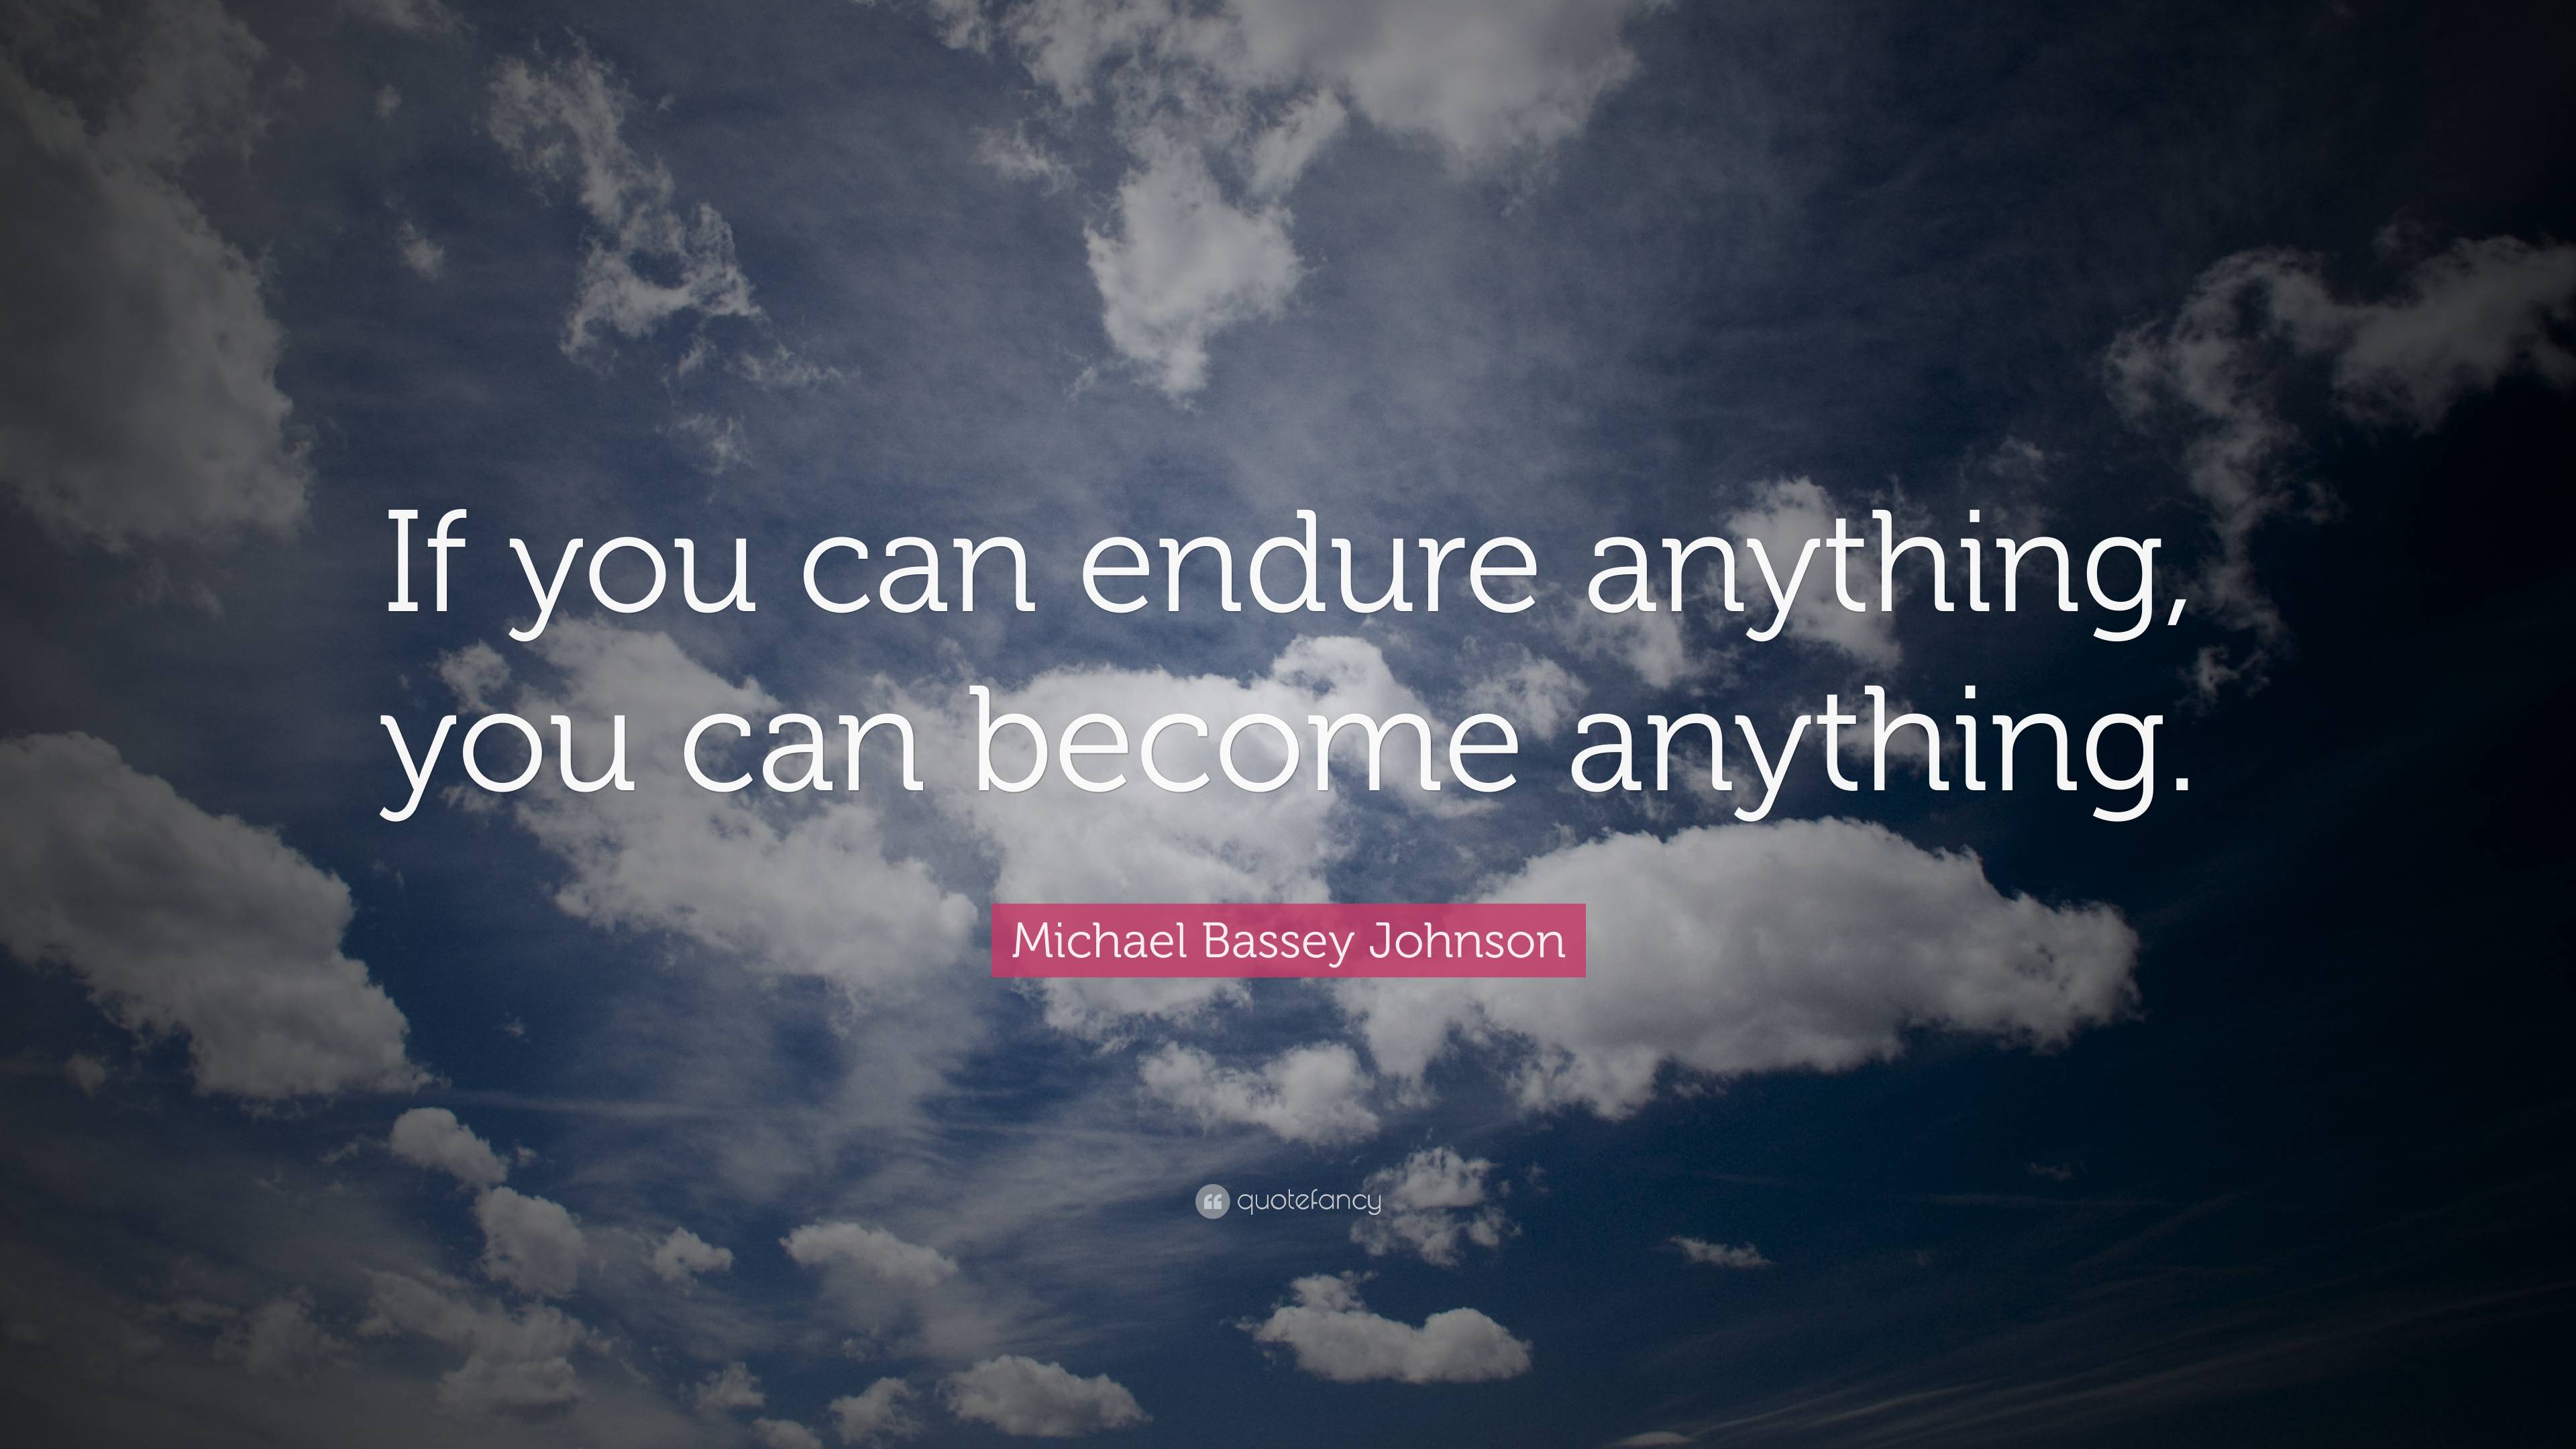 Michael Bassey Johnson Quote: “If you can endure anything, you can ...